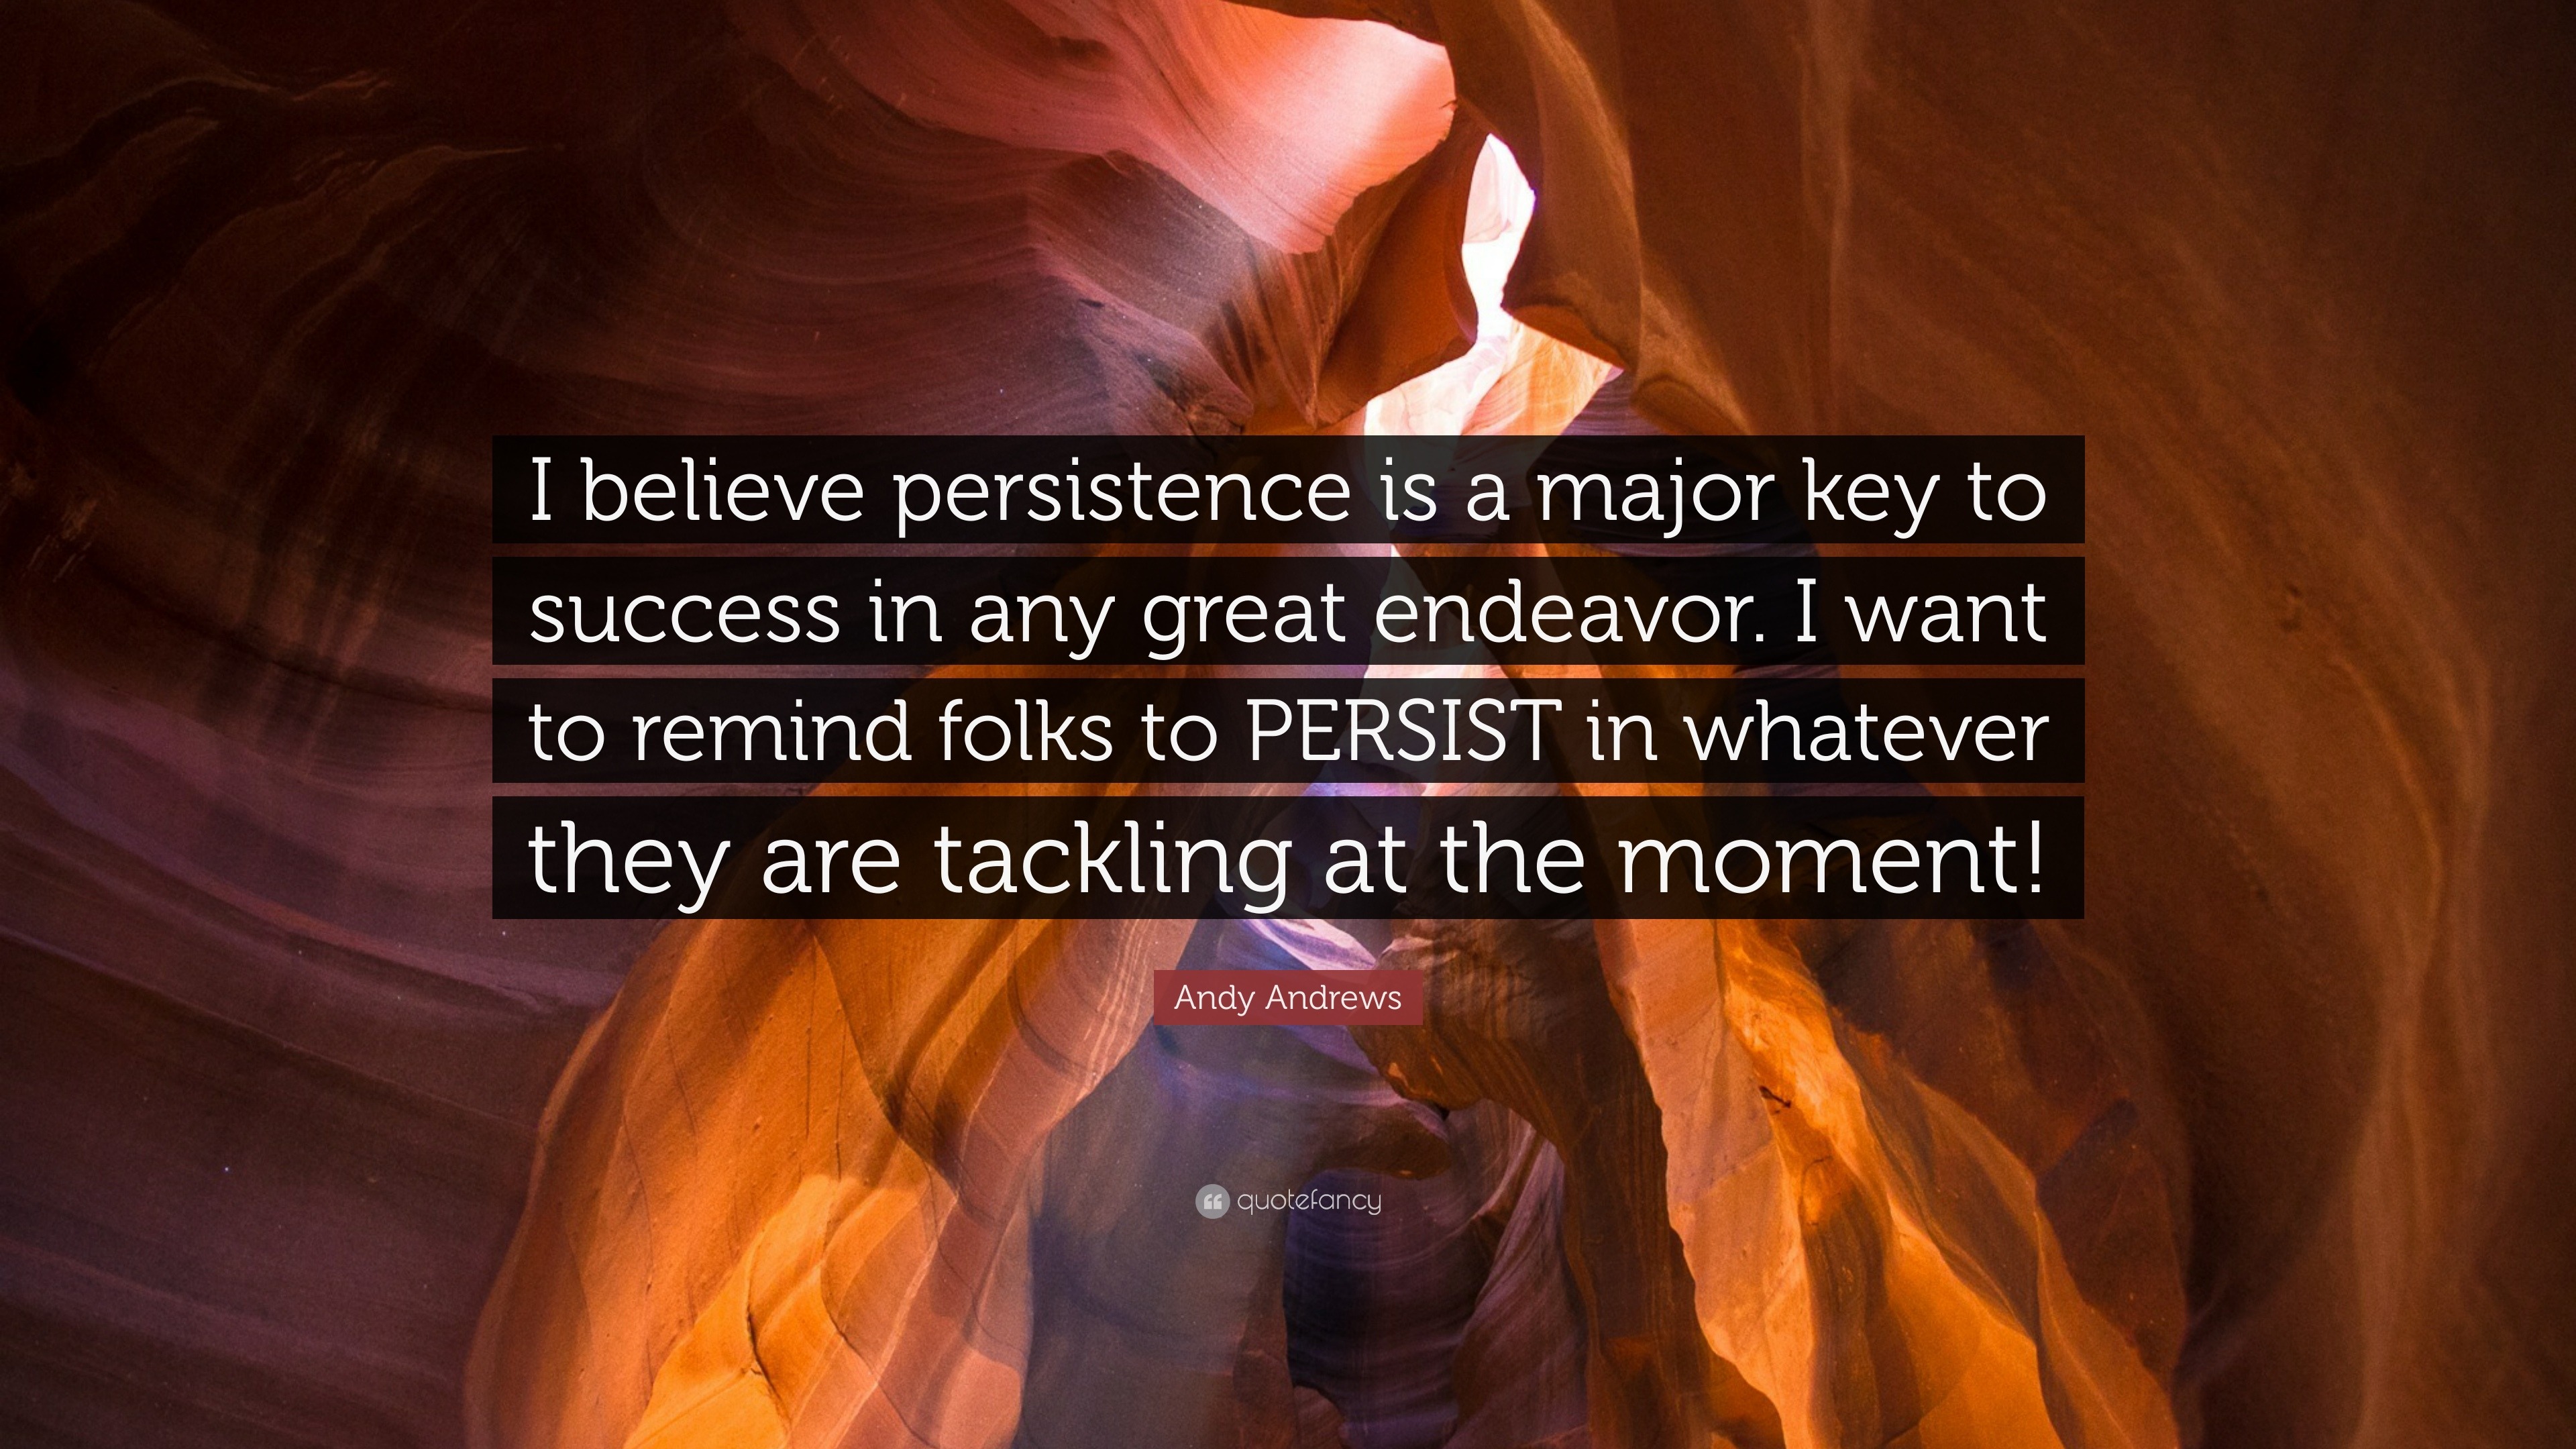 Andy Andrews Quote “I believe persistence is a major key